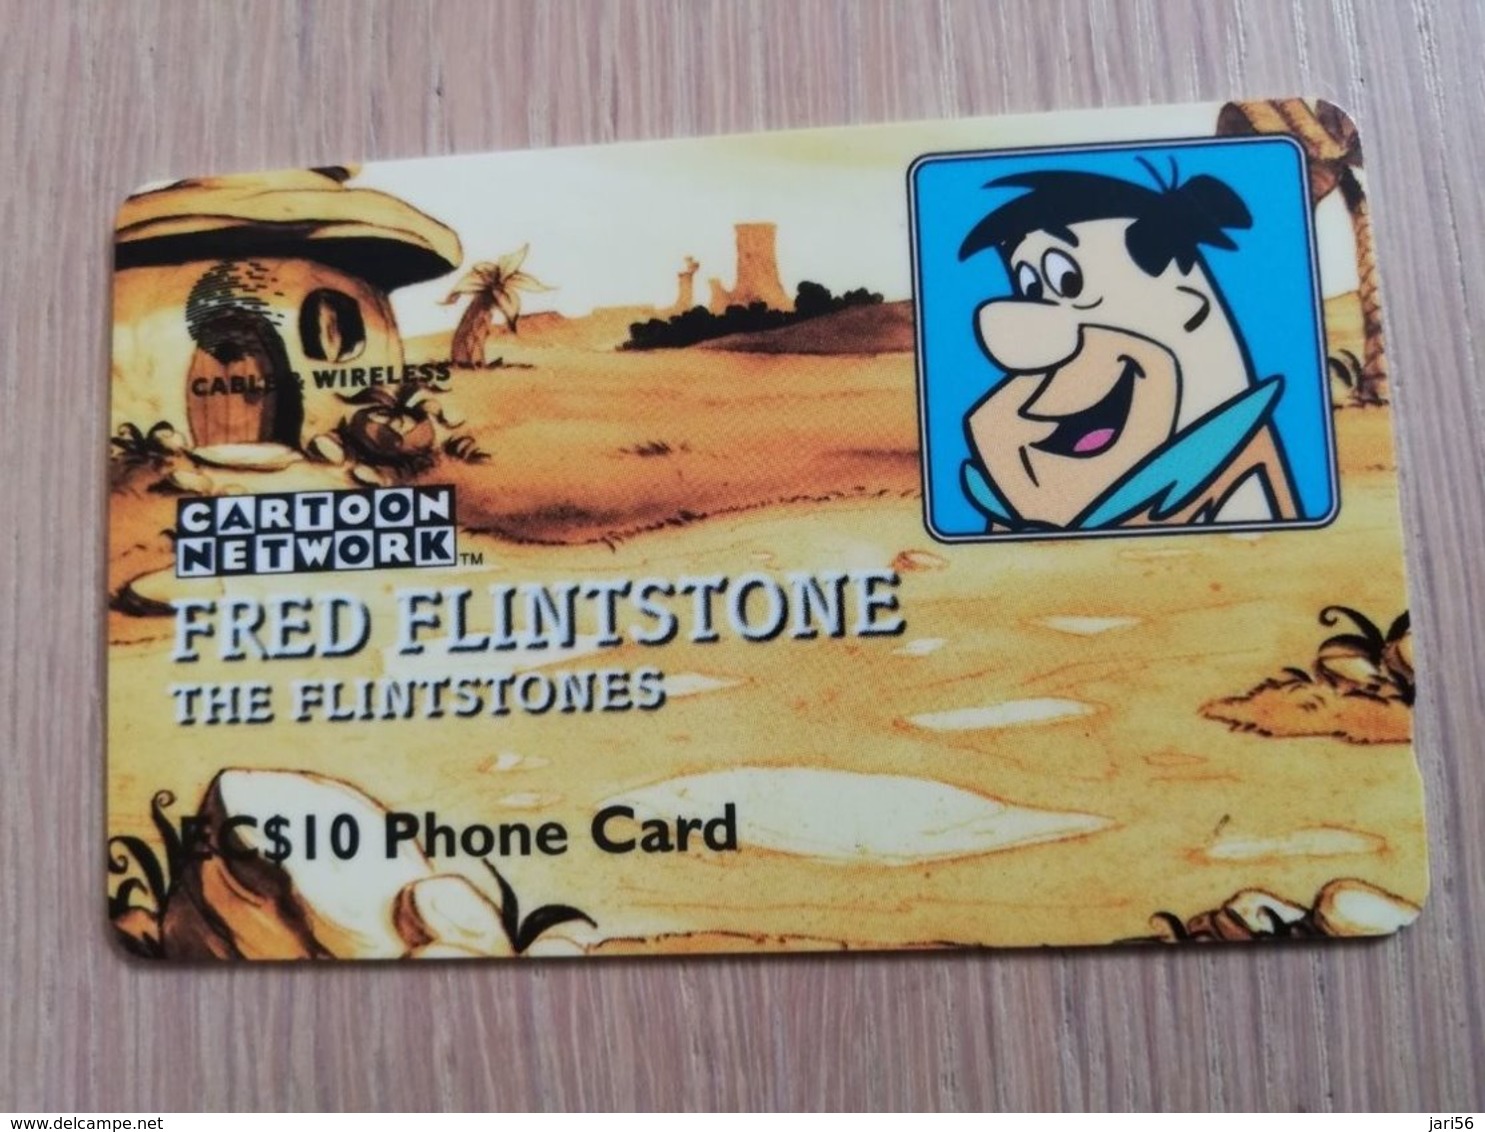 ST LUCIA    $ 10   CABLE & WIRELESS  STL-277D  277CSLD   FRED FLINSTONE     Fine Used Card ** 2452** - Sainte Lucie